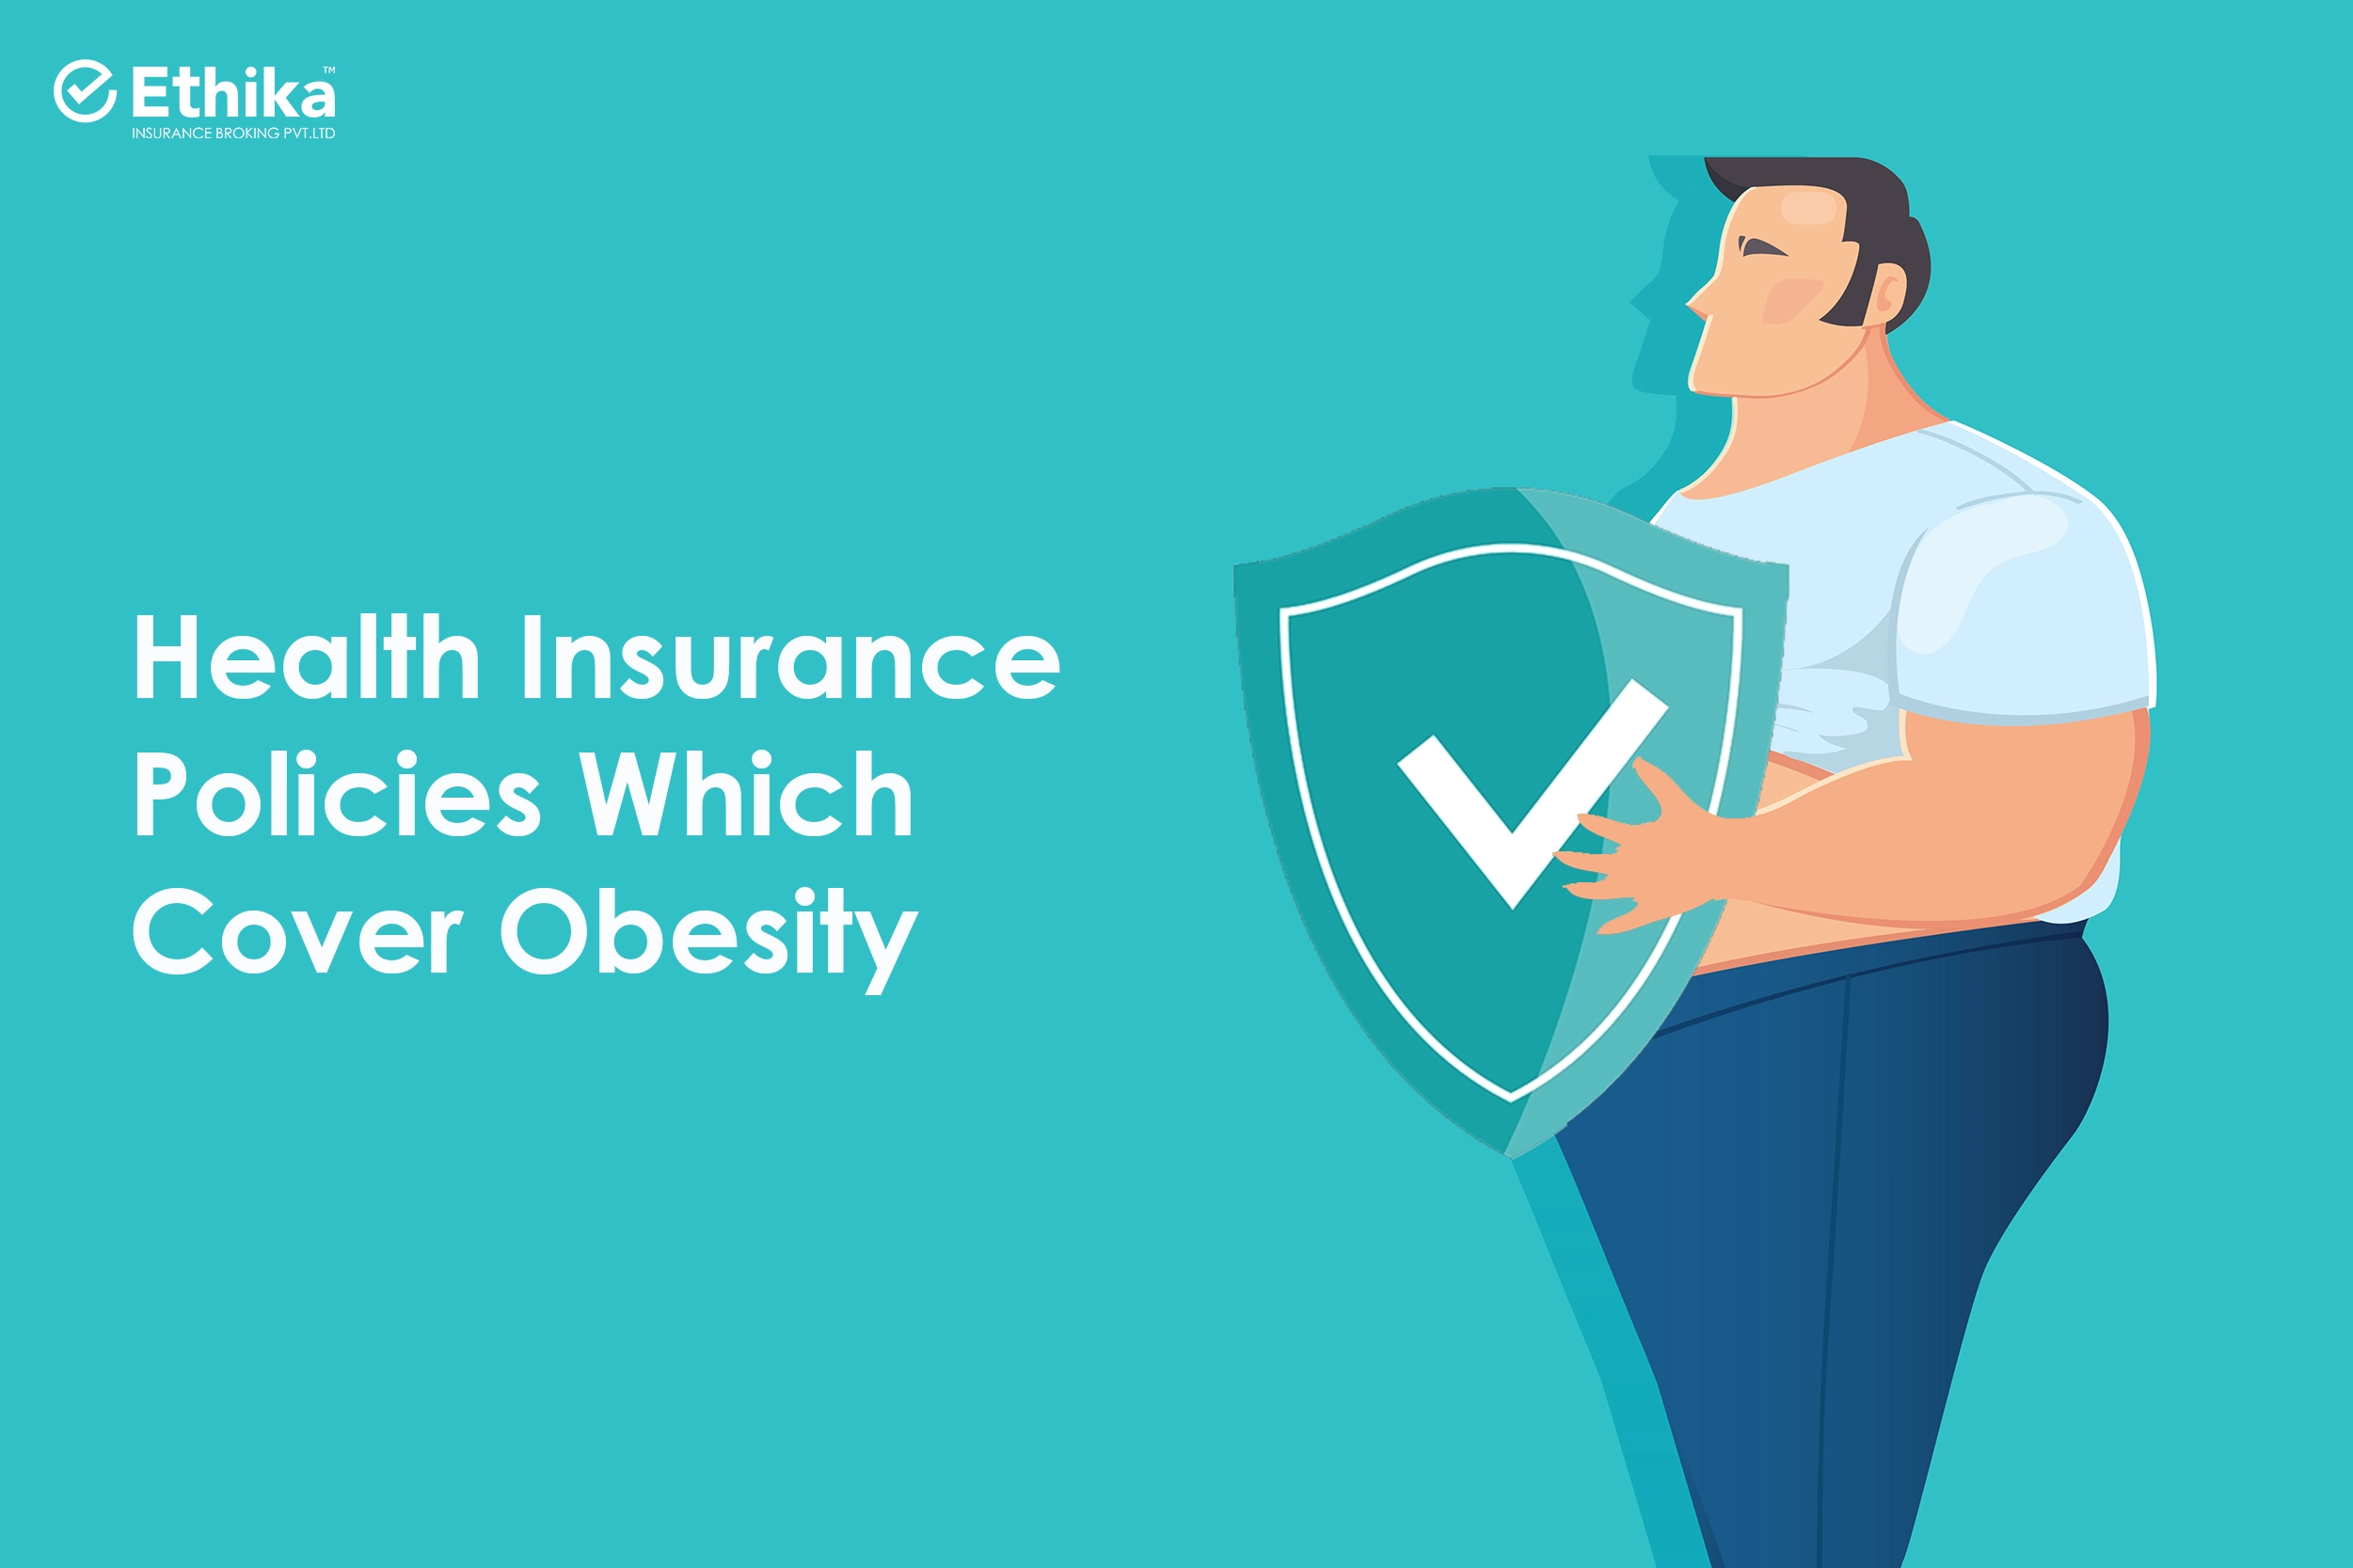 Health Insurance Policies Which Cover Obesity